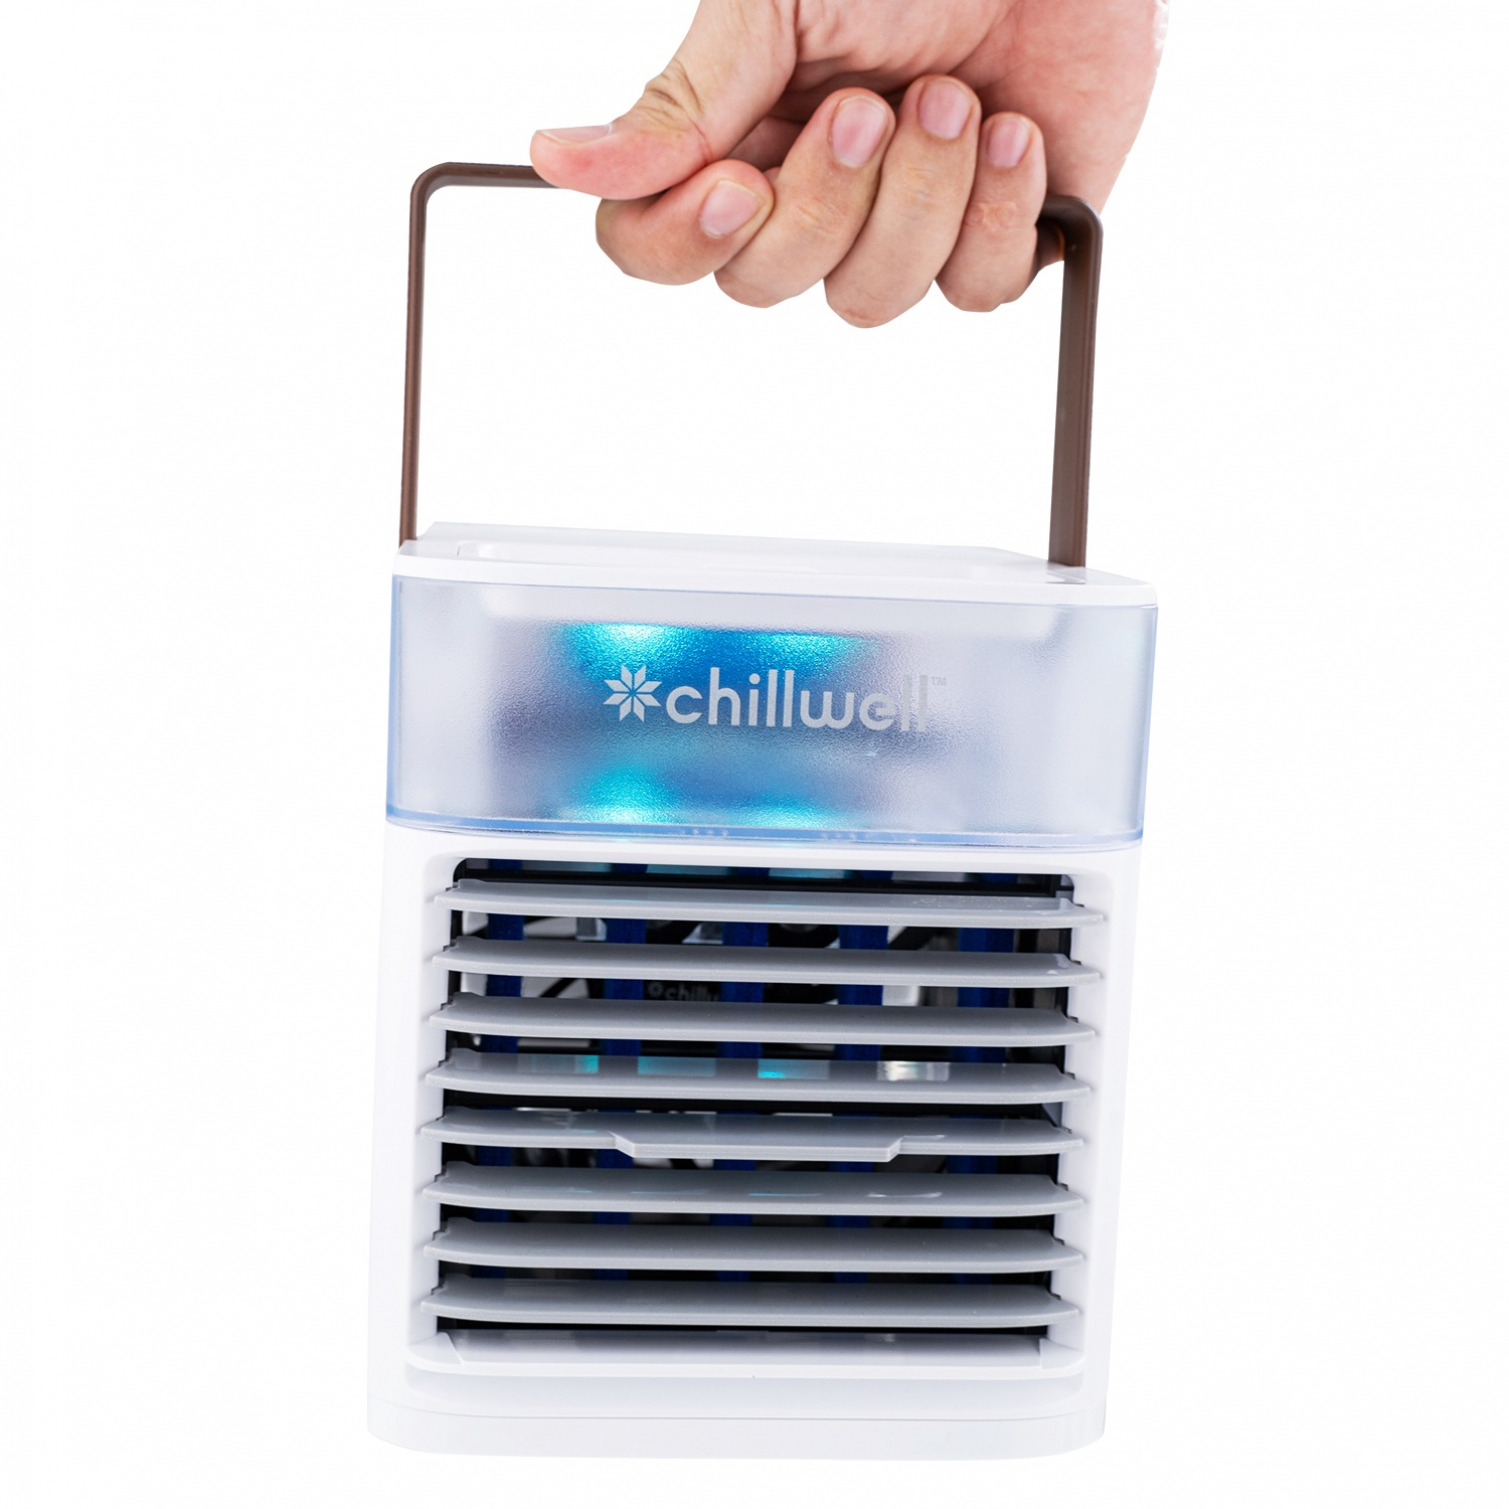 Chillwell Ac Mini Room Air Cooler